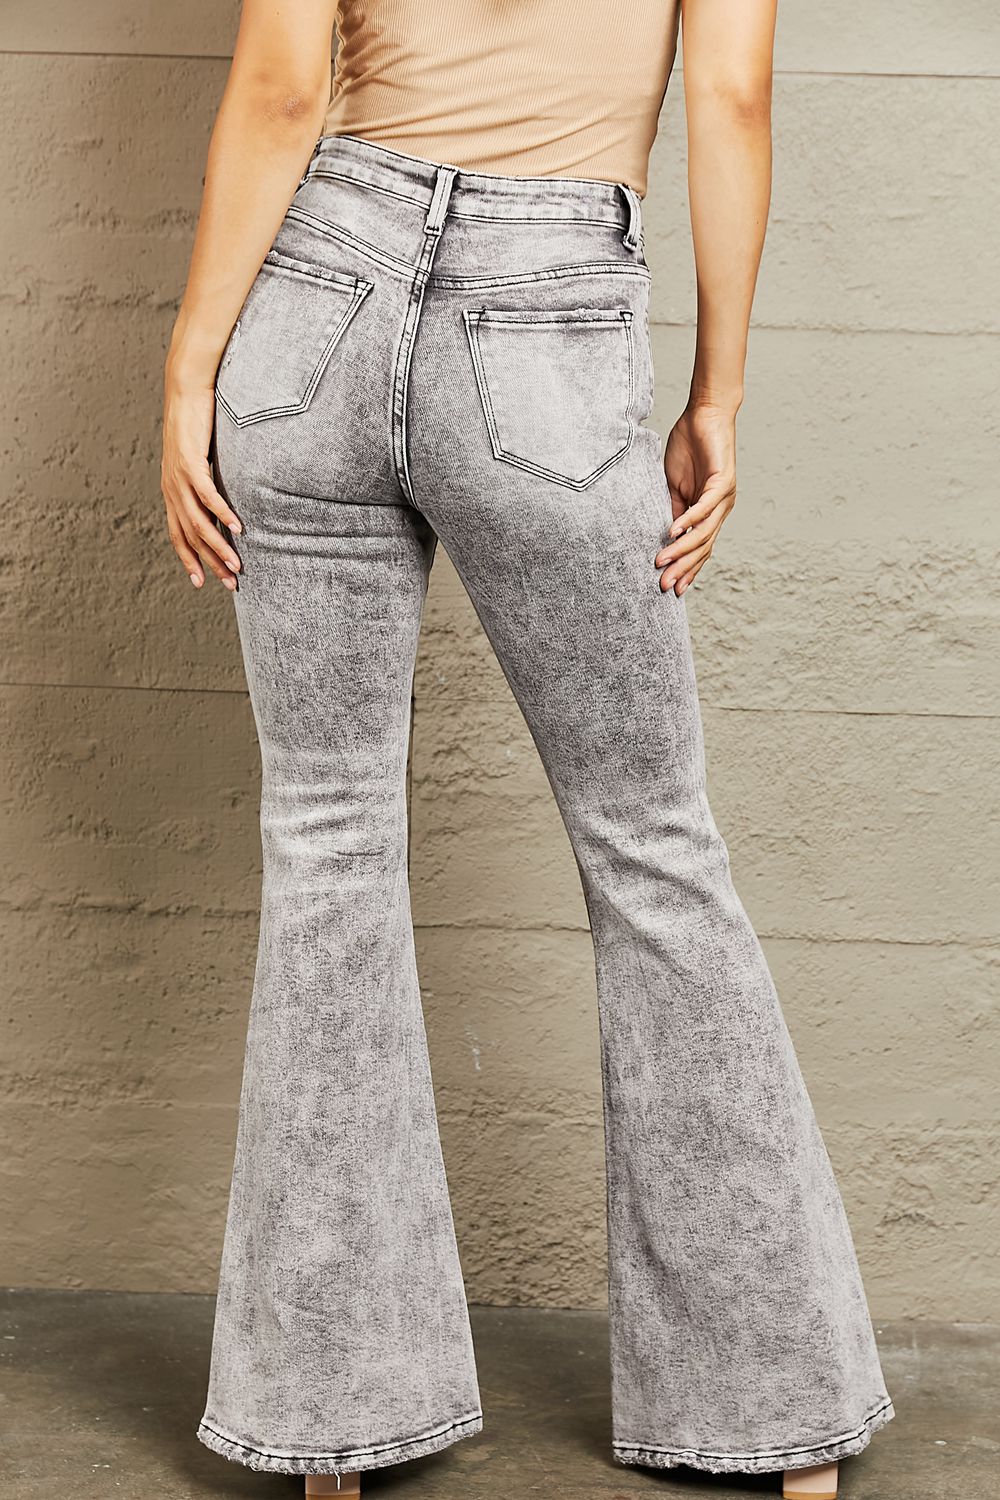 BAYEAS High Waisted Acid Wash Flare Jeans for Women - Slimming and Flattering for All Body Types - Chic, Distressed, and Highly Stretchy